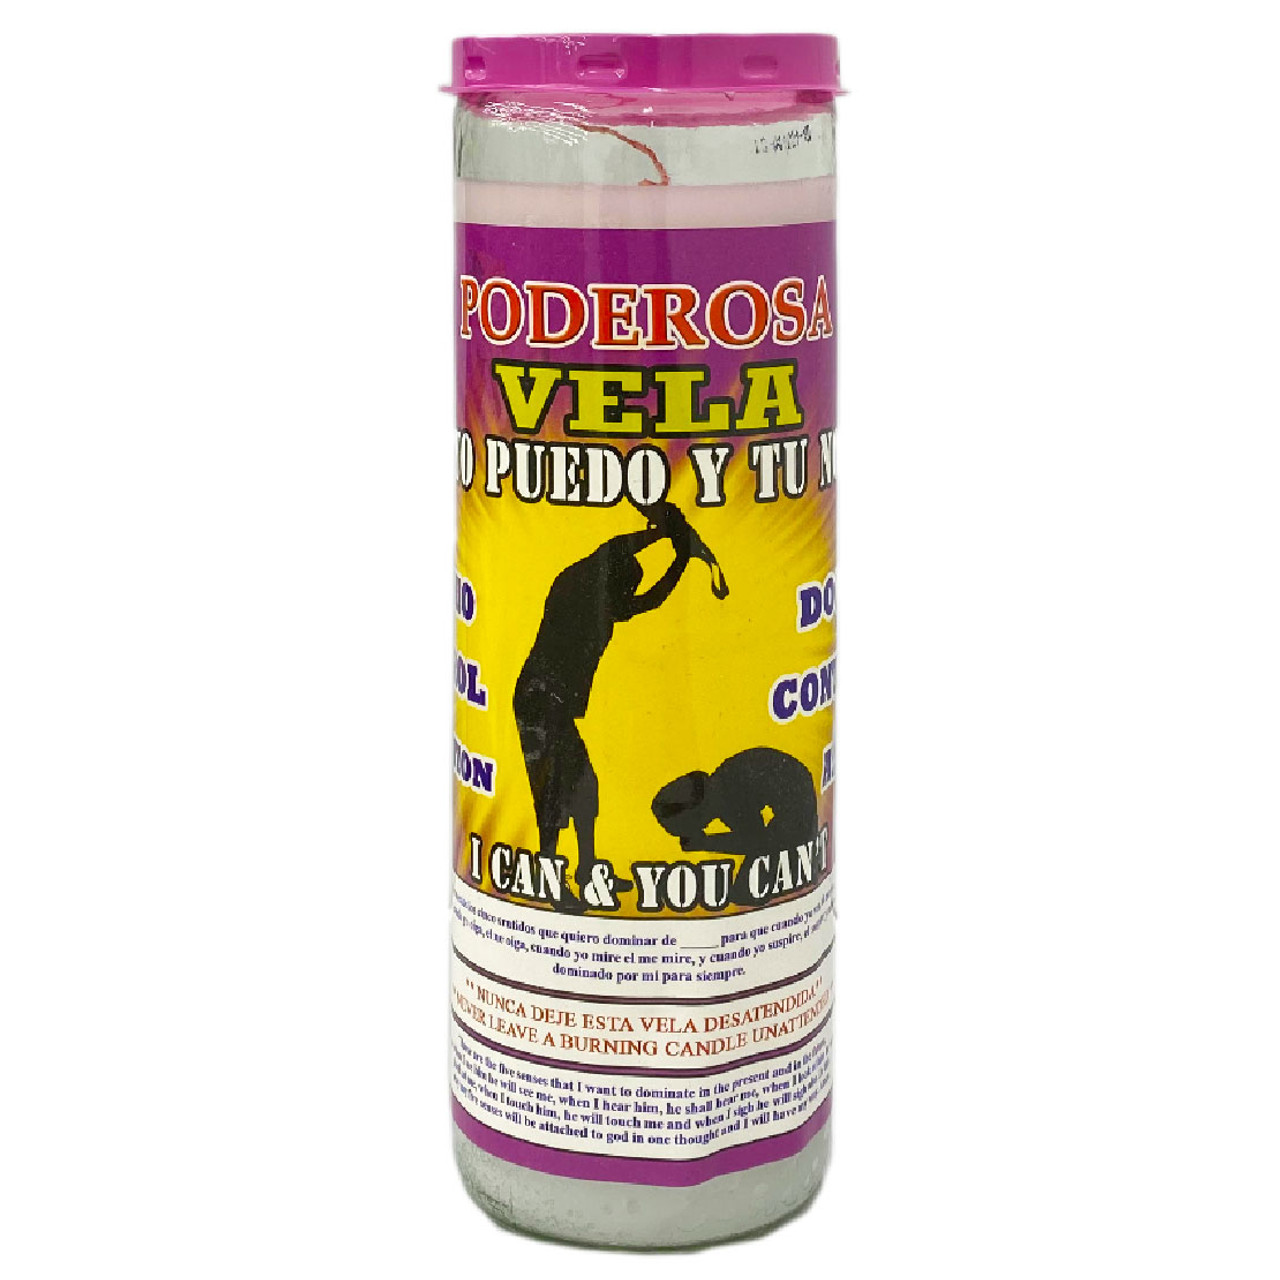 Veladora Preparada Yo Puedo Y Tu No - Fixed And Scented 7 Day Candle I Can You Can Not